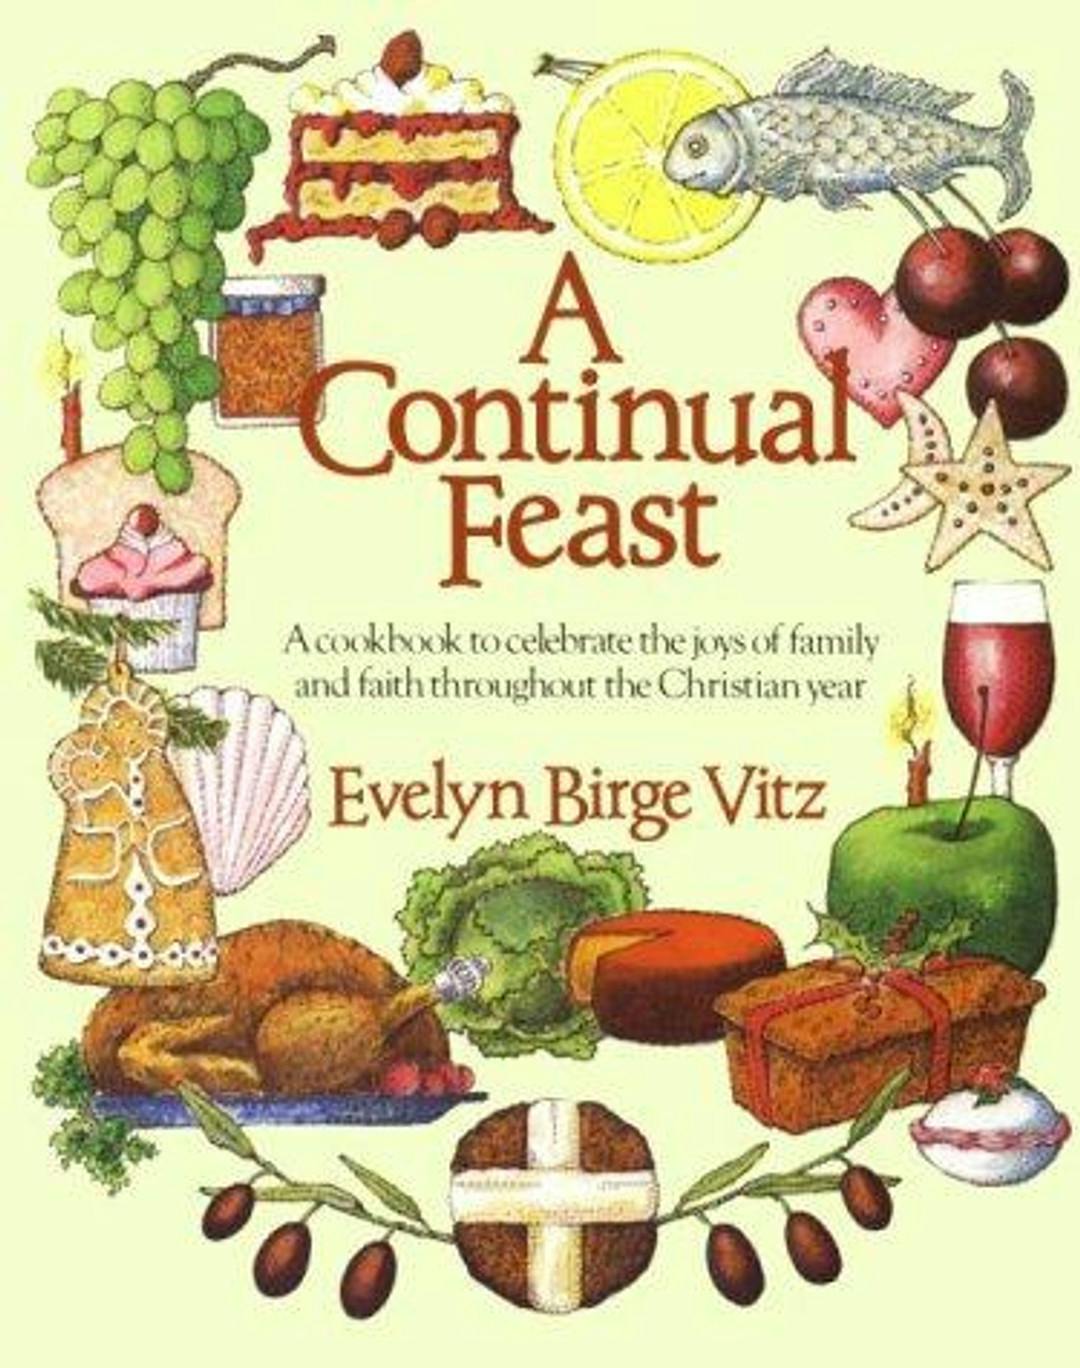 A Continual Feast: A Cookbook to Celebrate the Joys of Family and Faith throughout the Christian Year